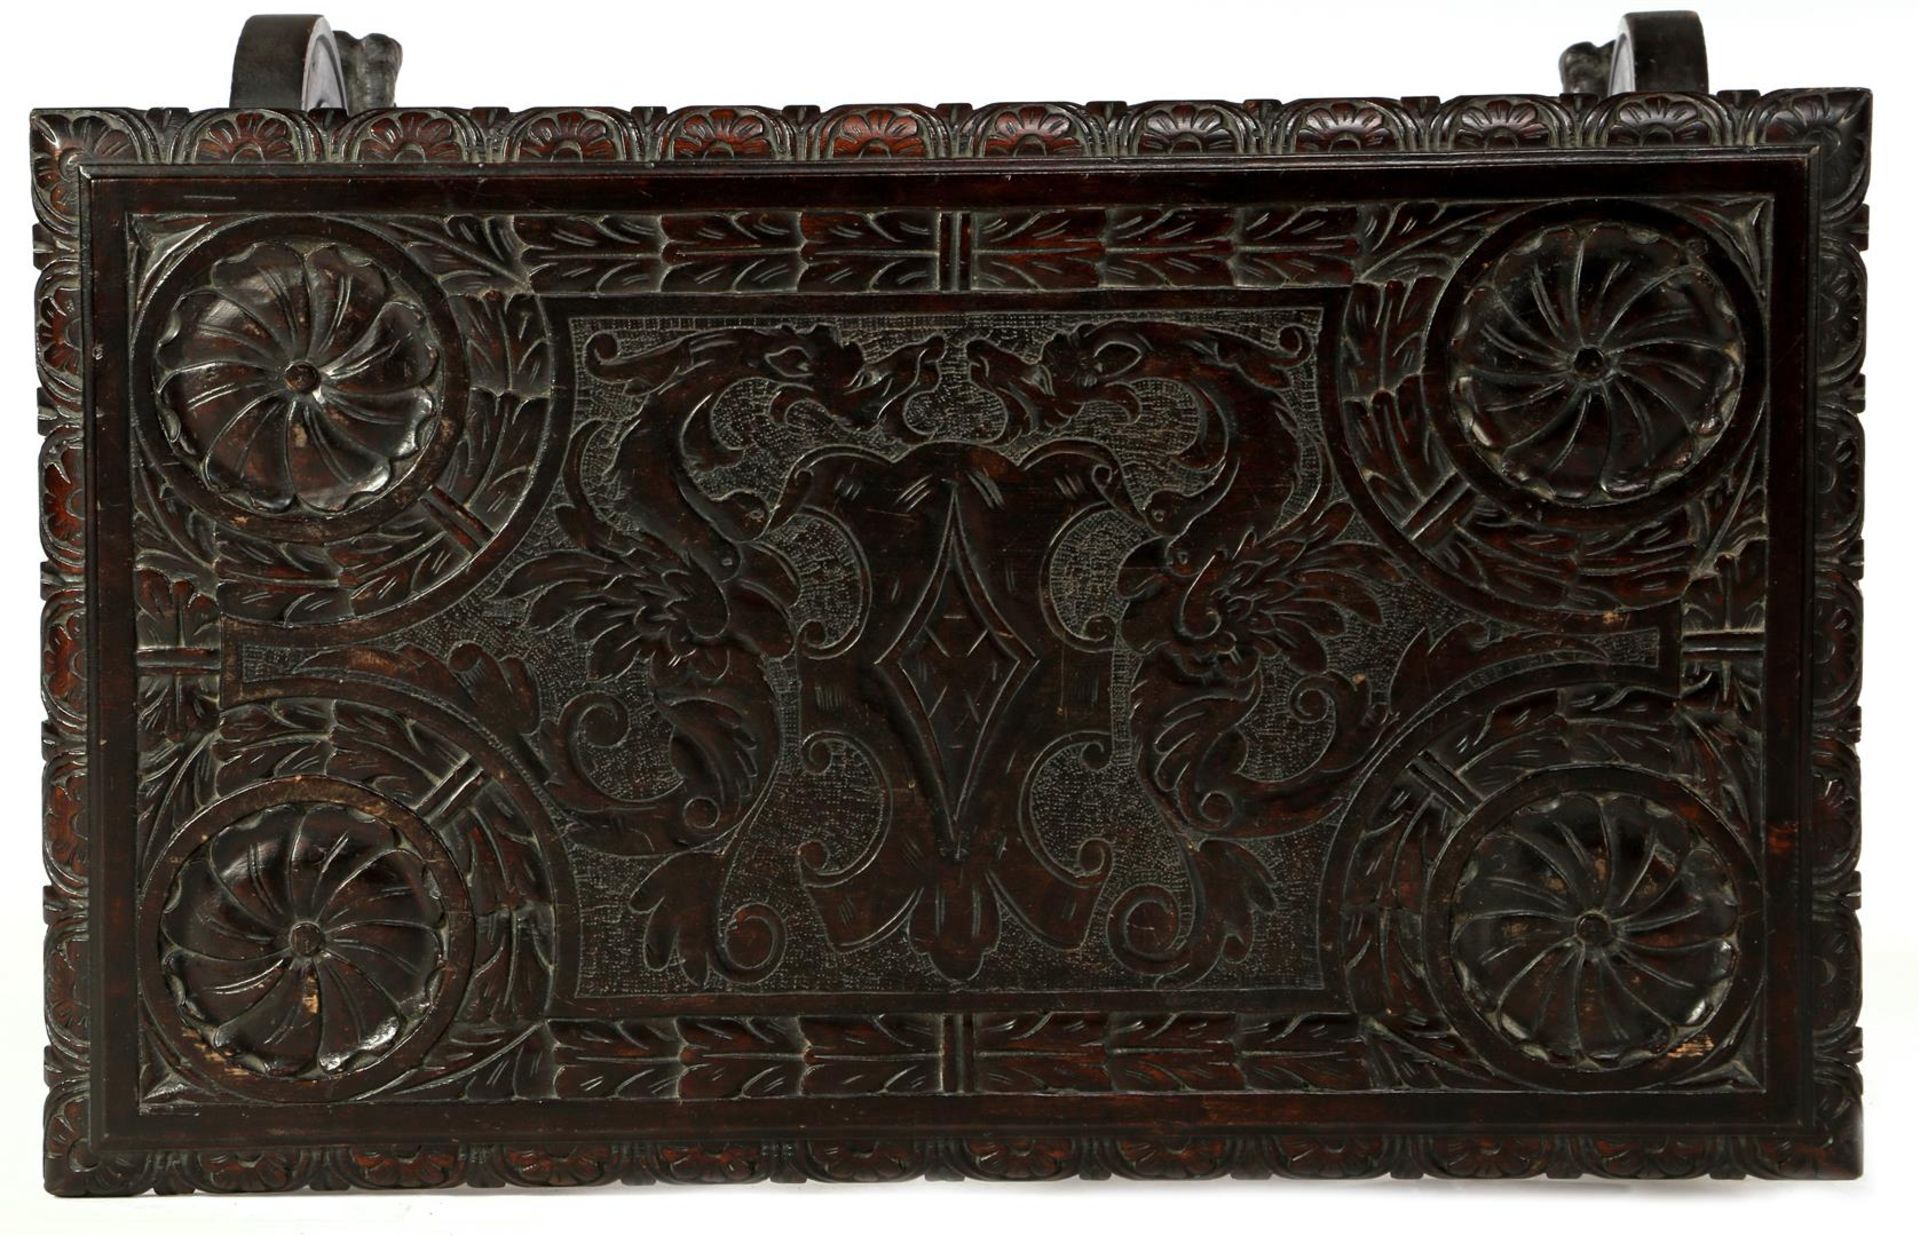 Spanish table with beautifully carved decoration - Image 2 of 2